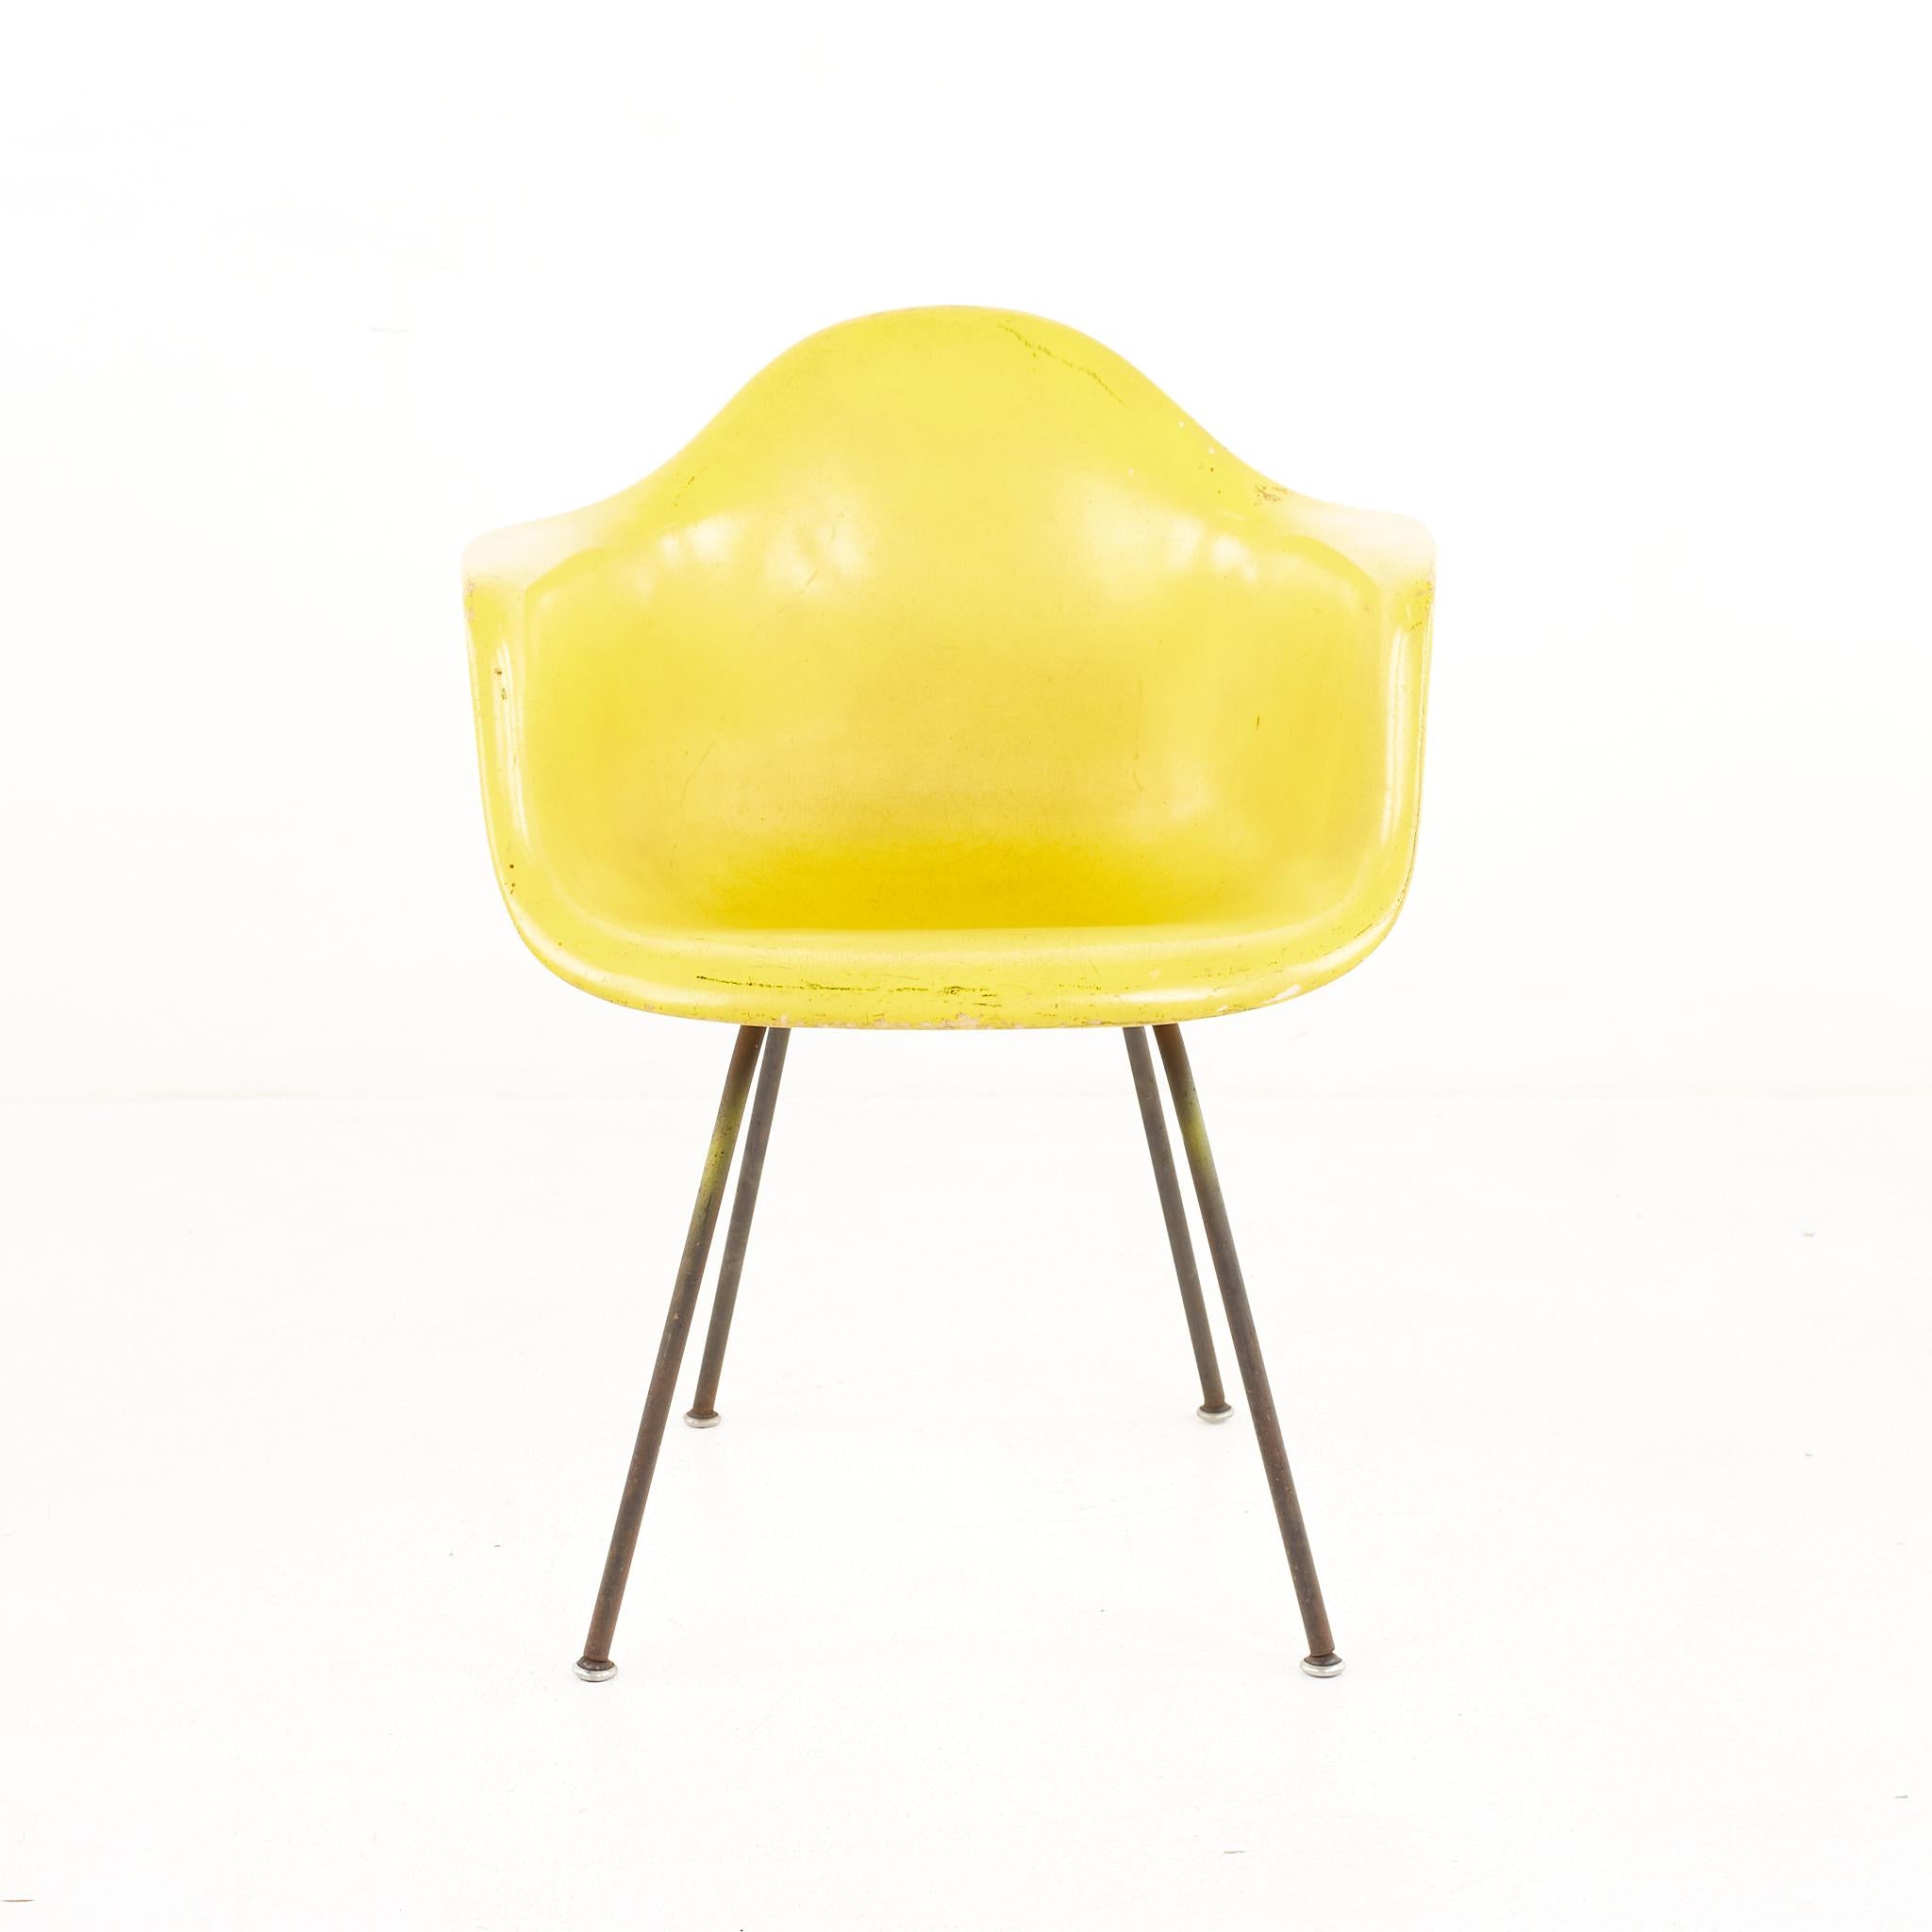 Eames For Herman Miller Mid Century Yellow Fiberglass Shell Chair

The chair measures: 24.75 wide x 22 deep x 31.25 high, with a seat height of 18 inches and arm height of 26 inches 

All pieces of furniture can be had in what we call restored